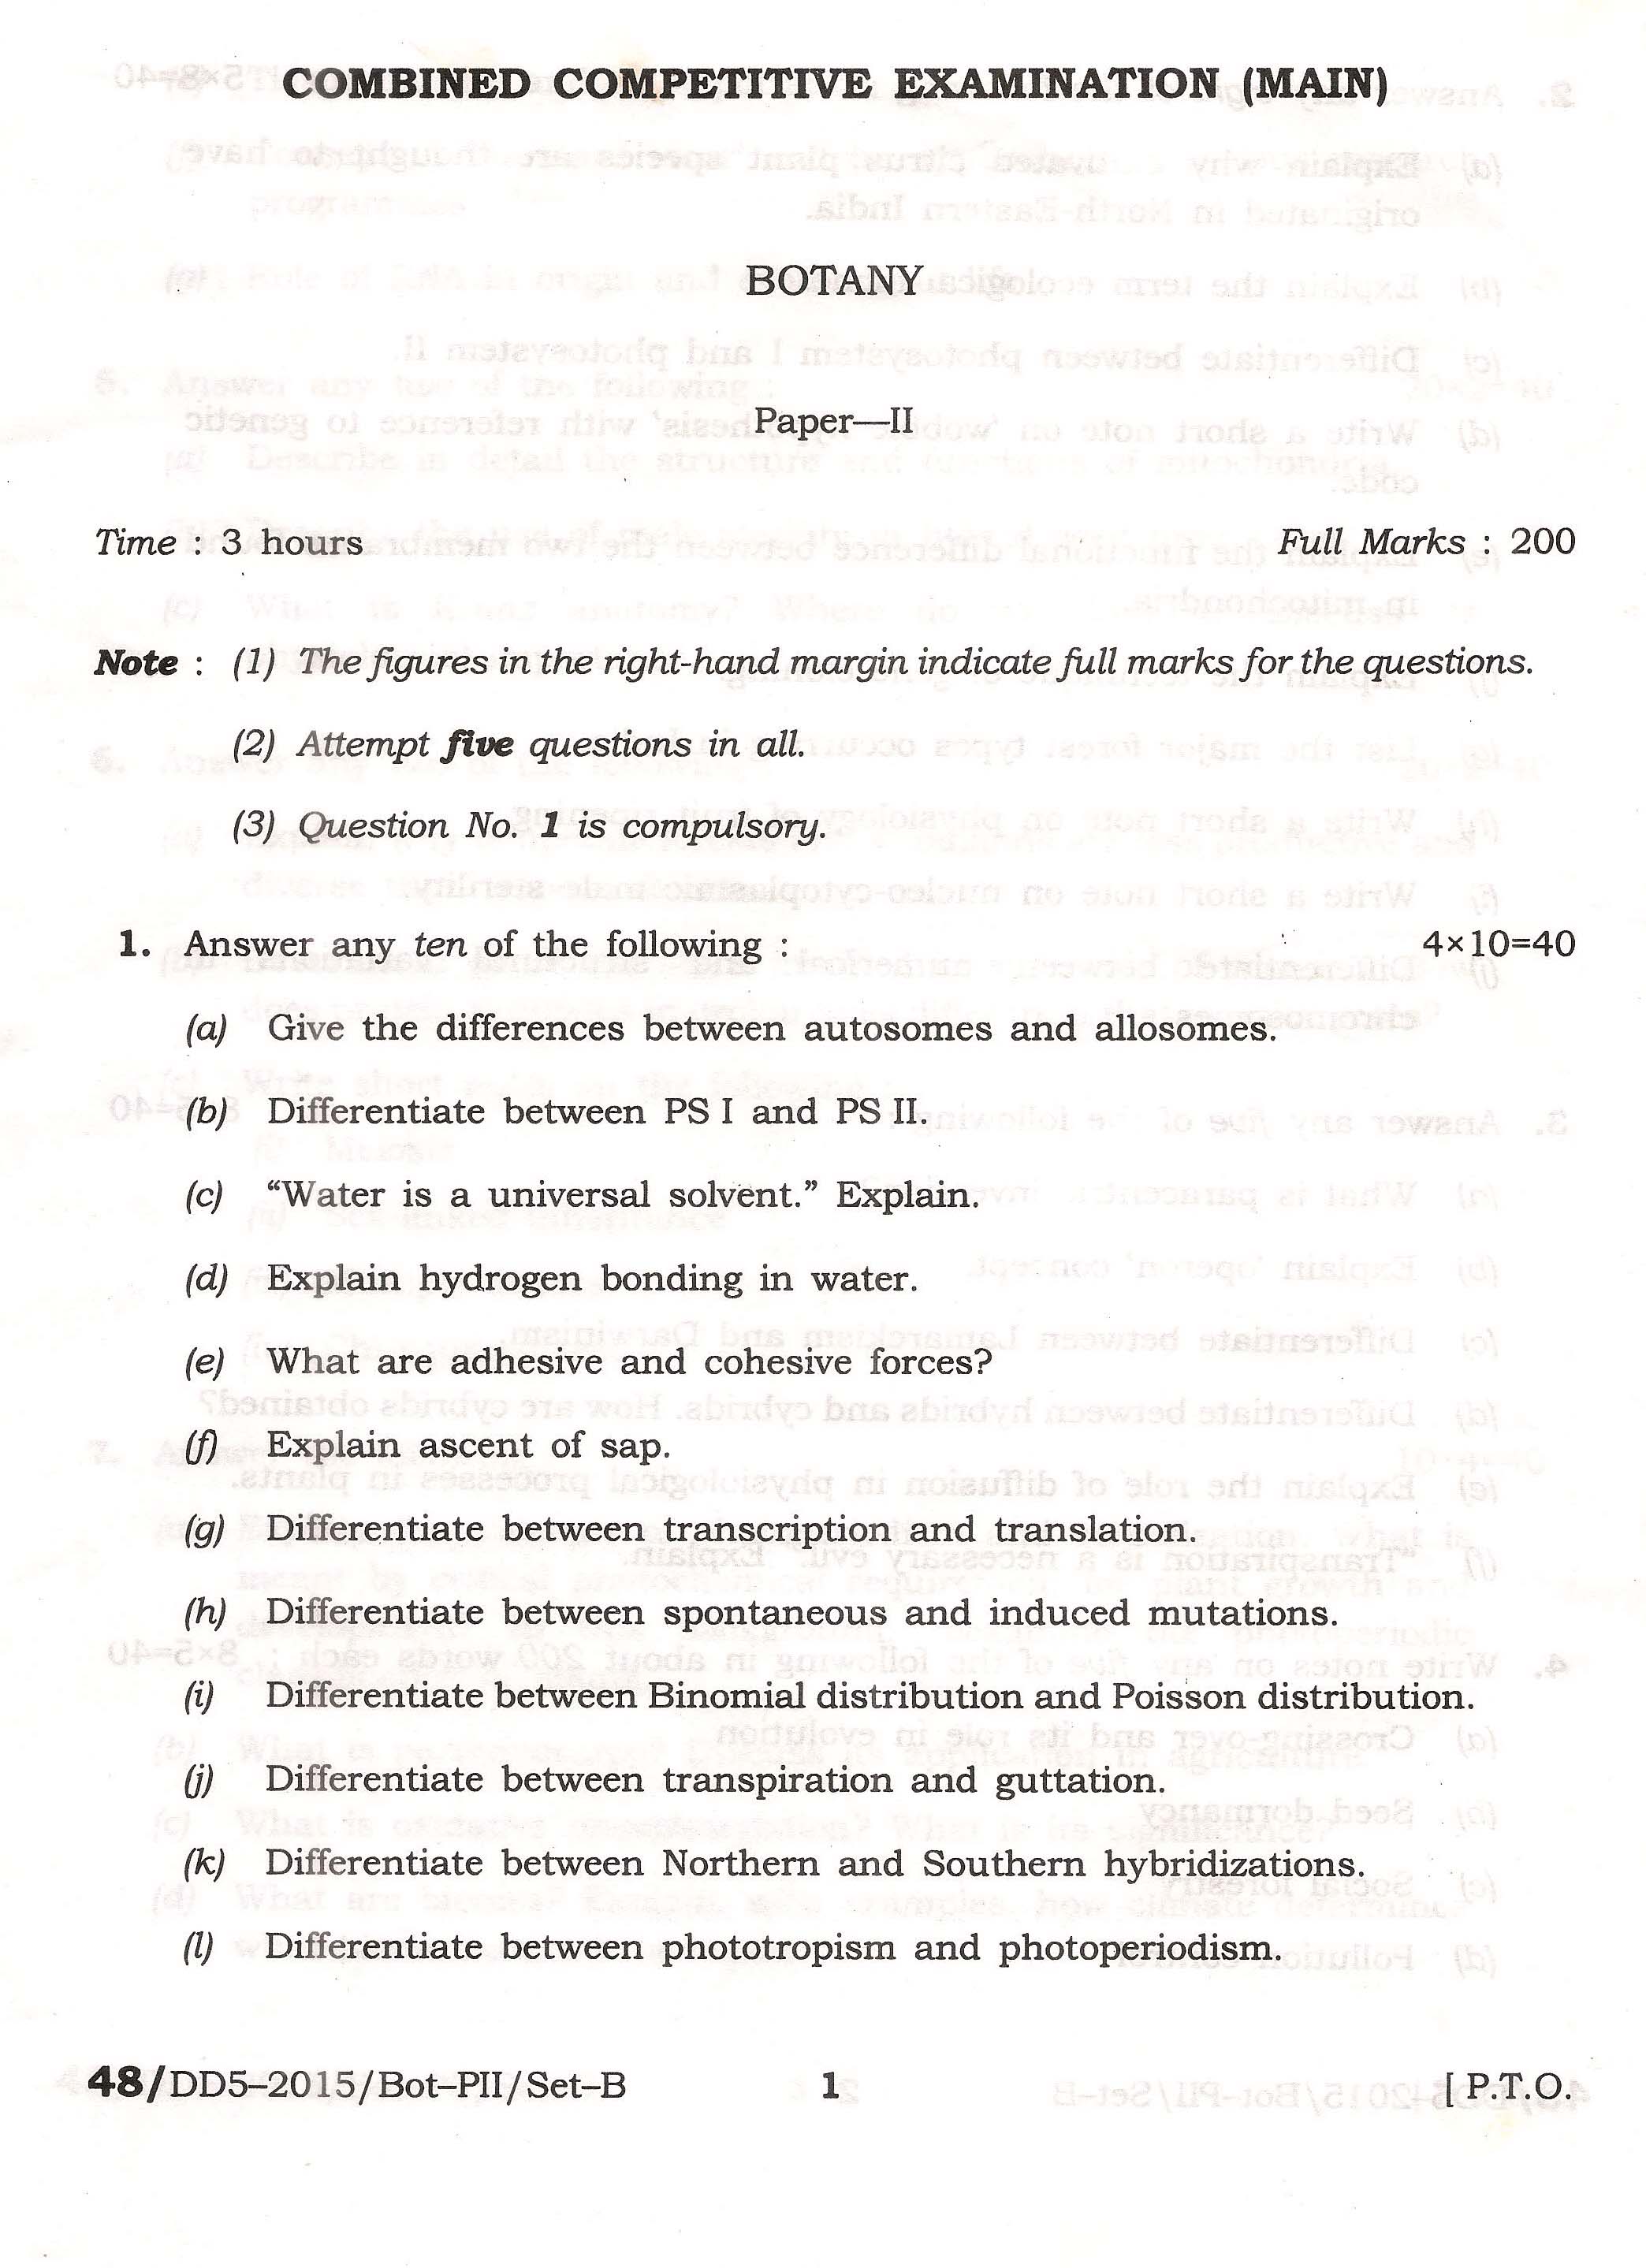 APPSC Combined Competitive Main Exam 2015 Botany Paper II 1